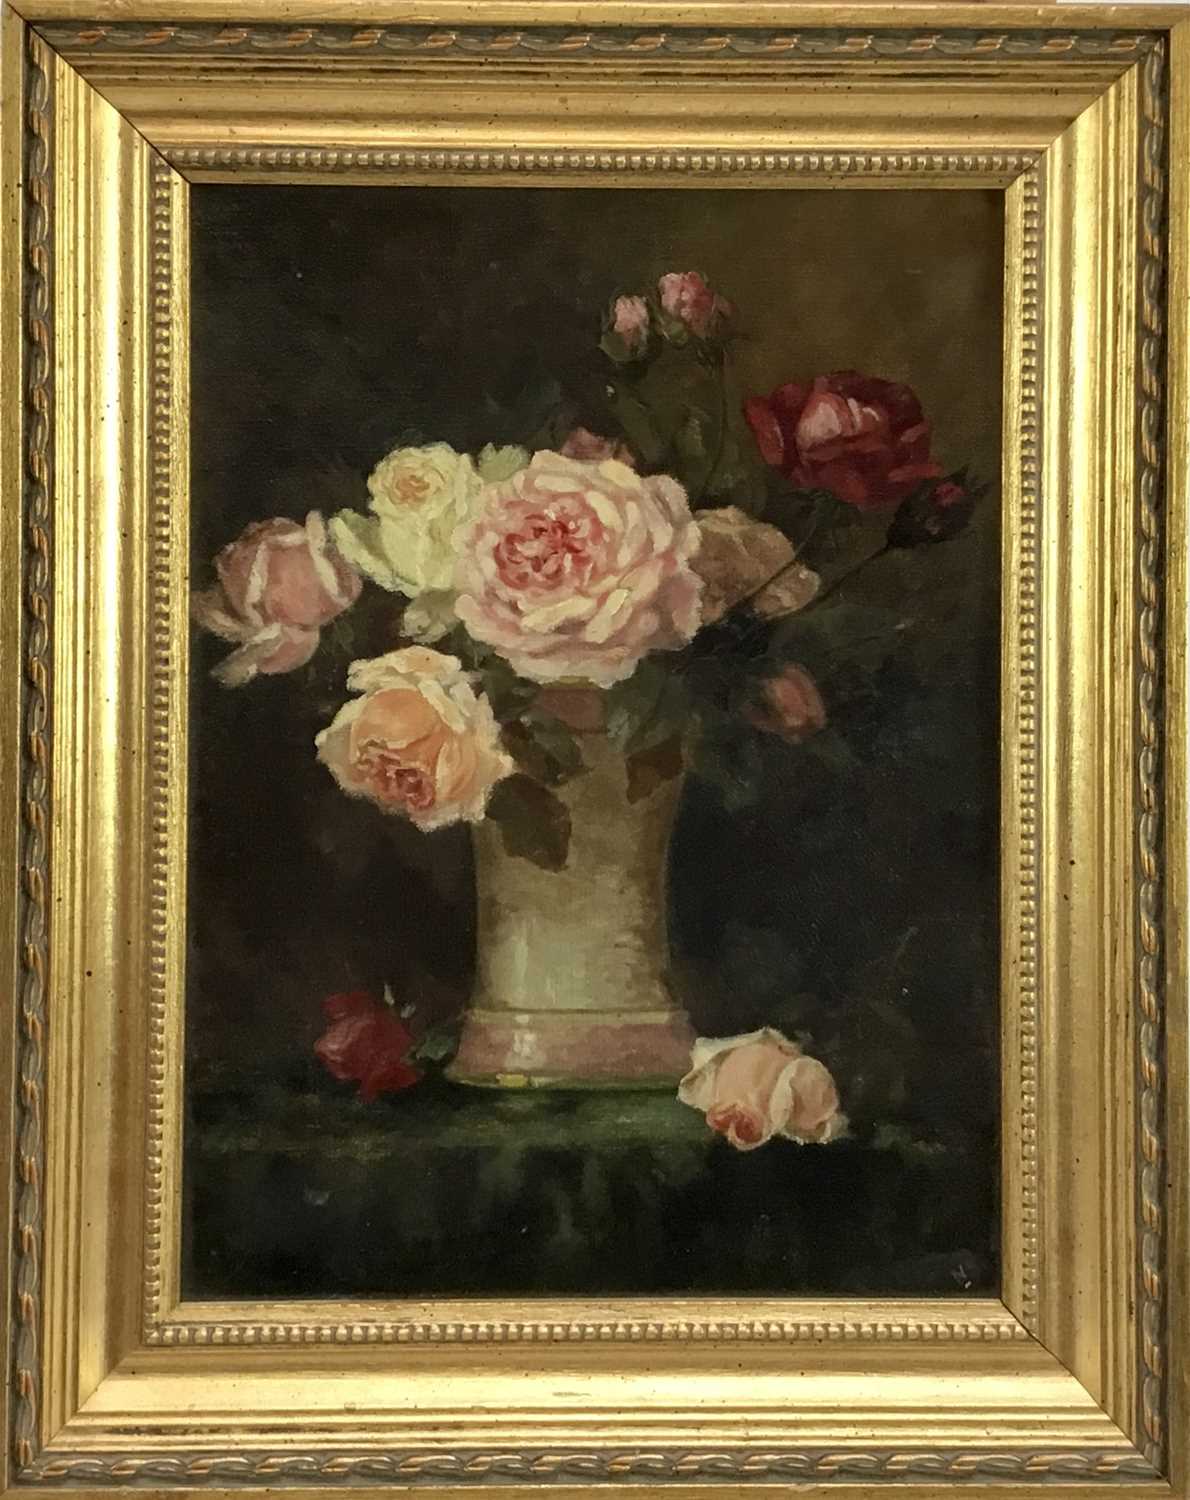 Lot 26 - English School early 20th Century, oil on canvas - Roses in a vase, 29cm x 21cm, framed